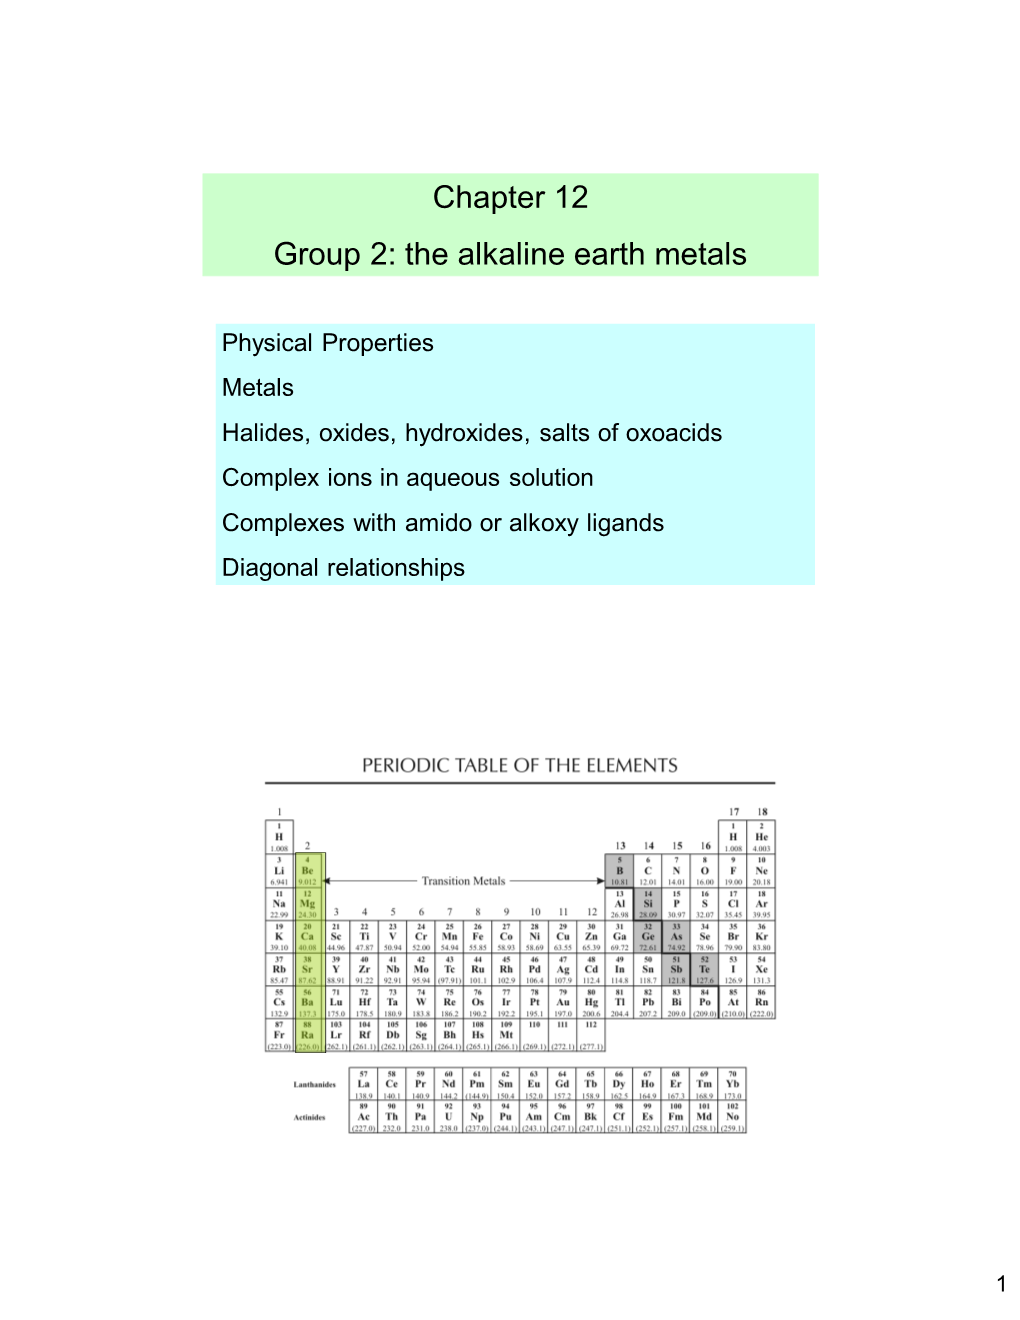 Chapter 12 Group 2: the Alkaline Earth Metals